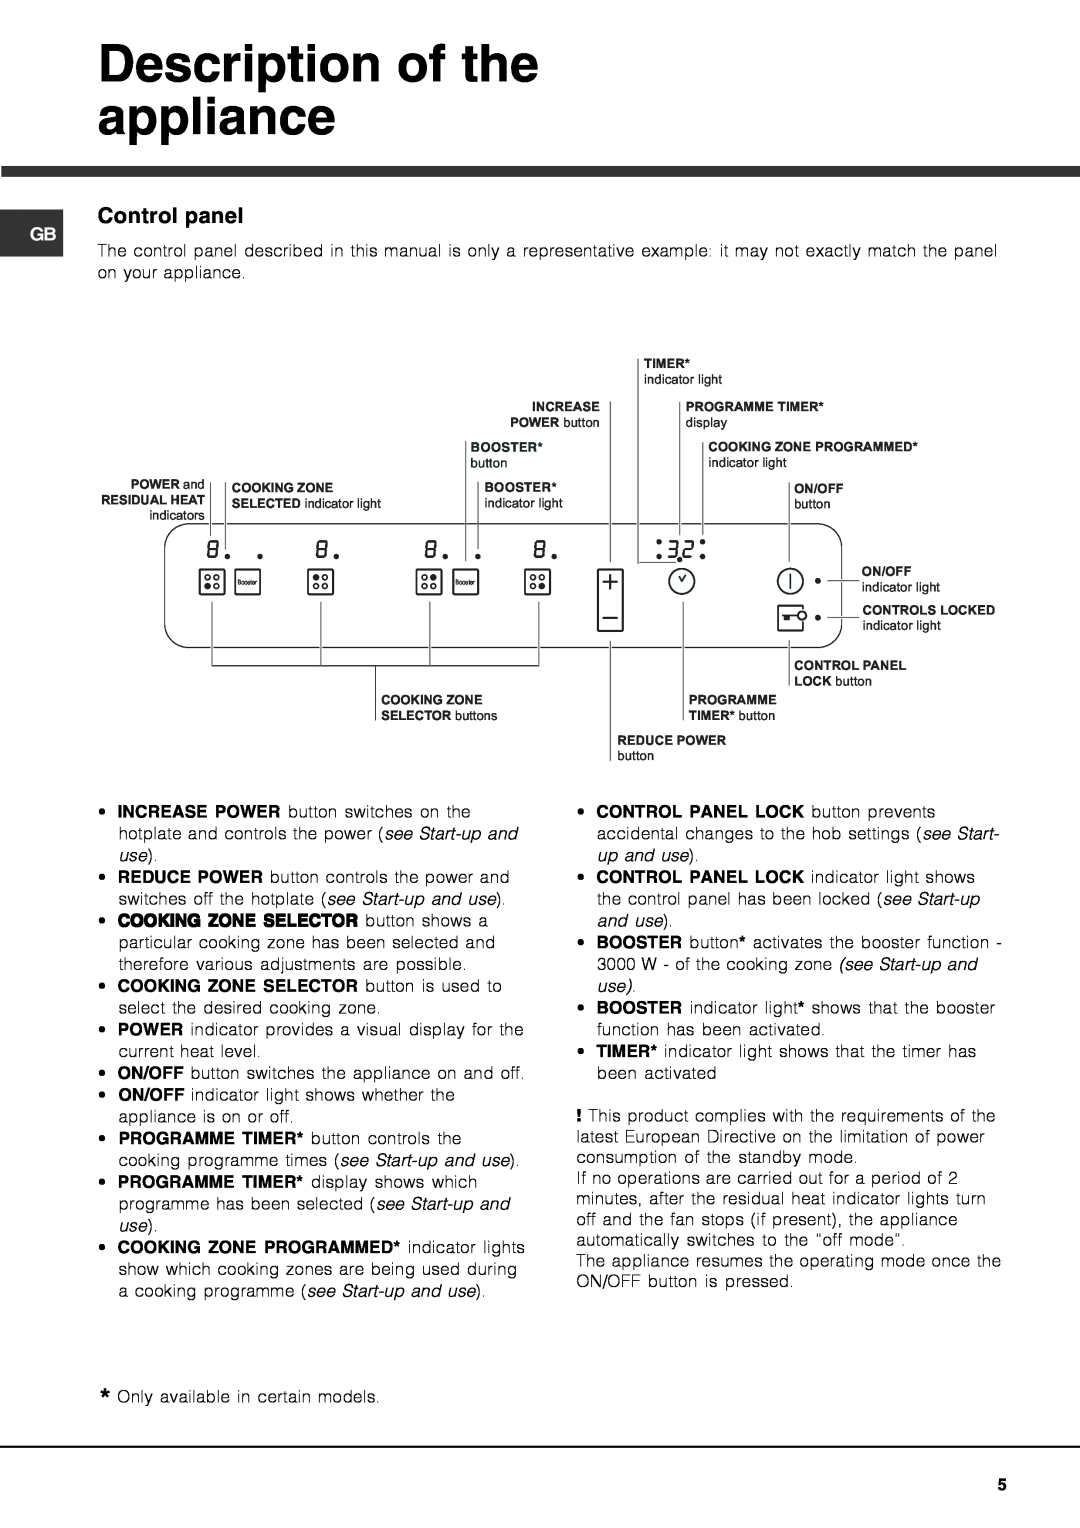 Hotpoint CIC 642 C, CIA 641 C S operating instructions Description of the appliance, Control panel 